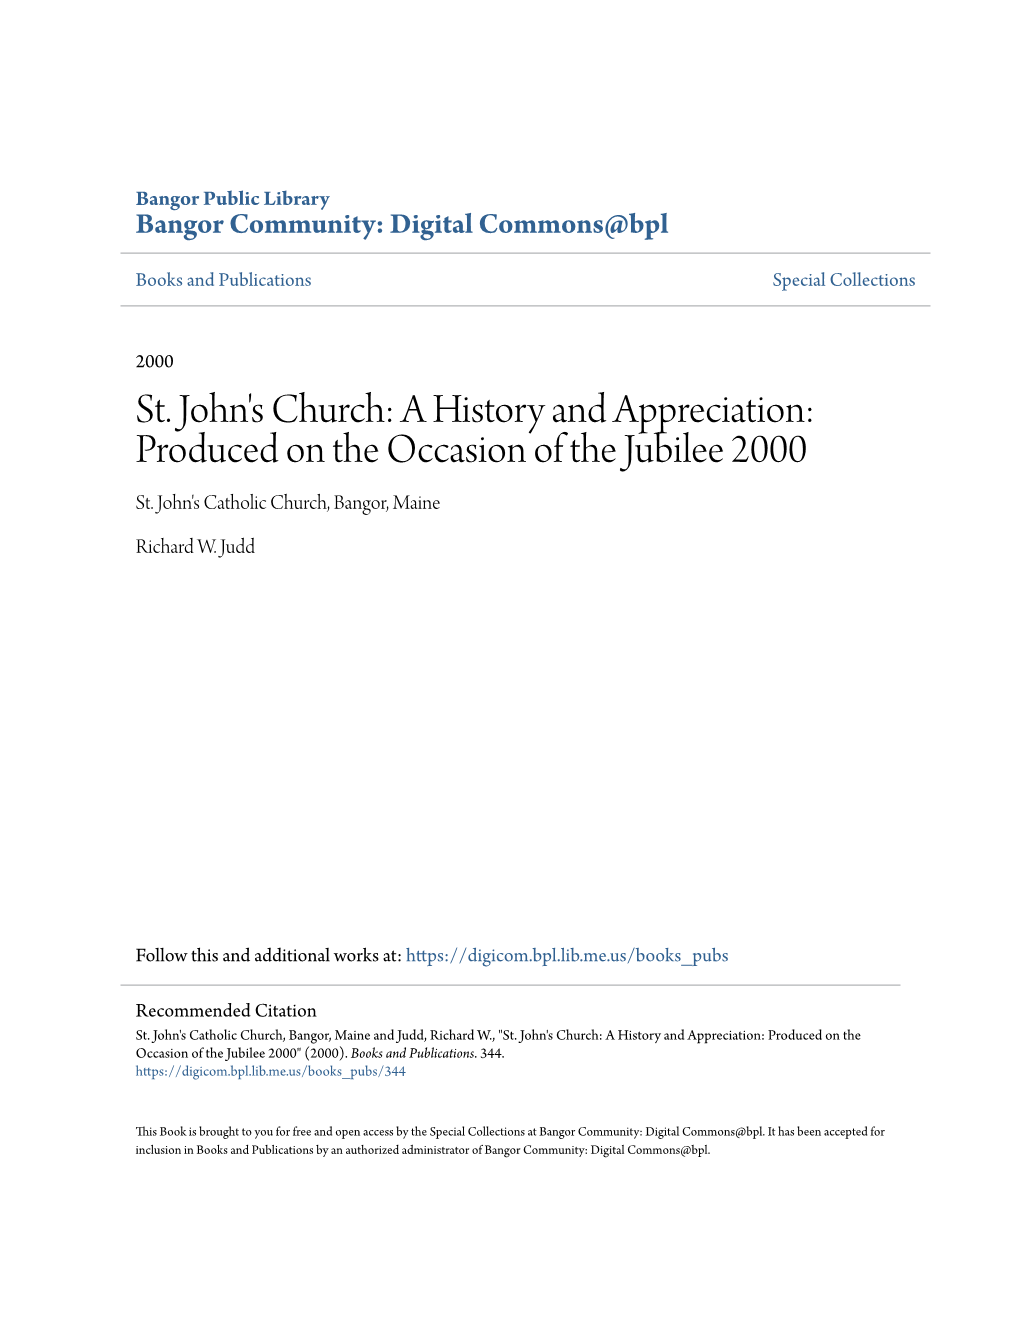 St. John's Church: a History and Appreciation: Produced on the Occasion of the Jubilee 2000 St